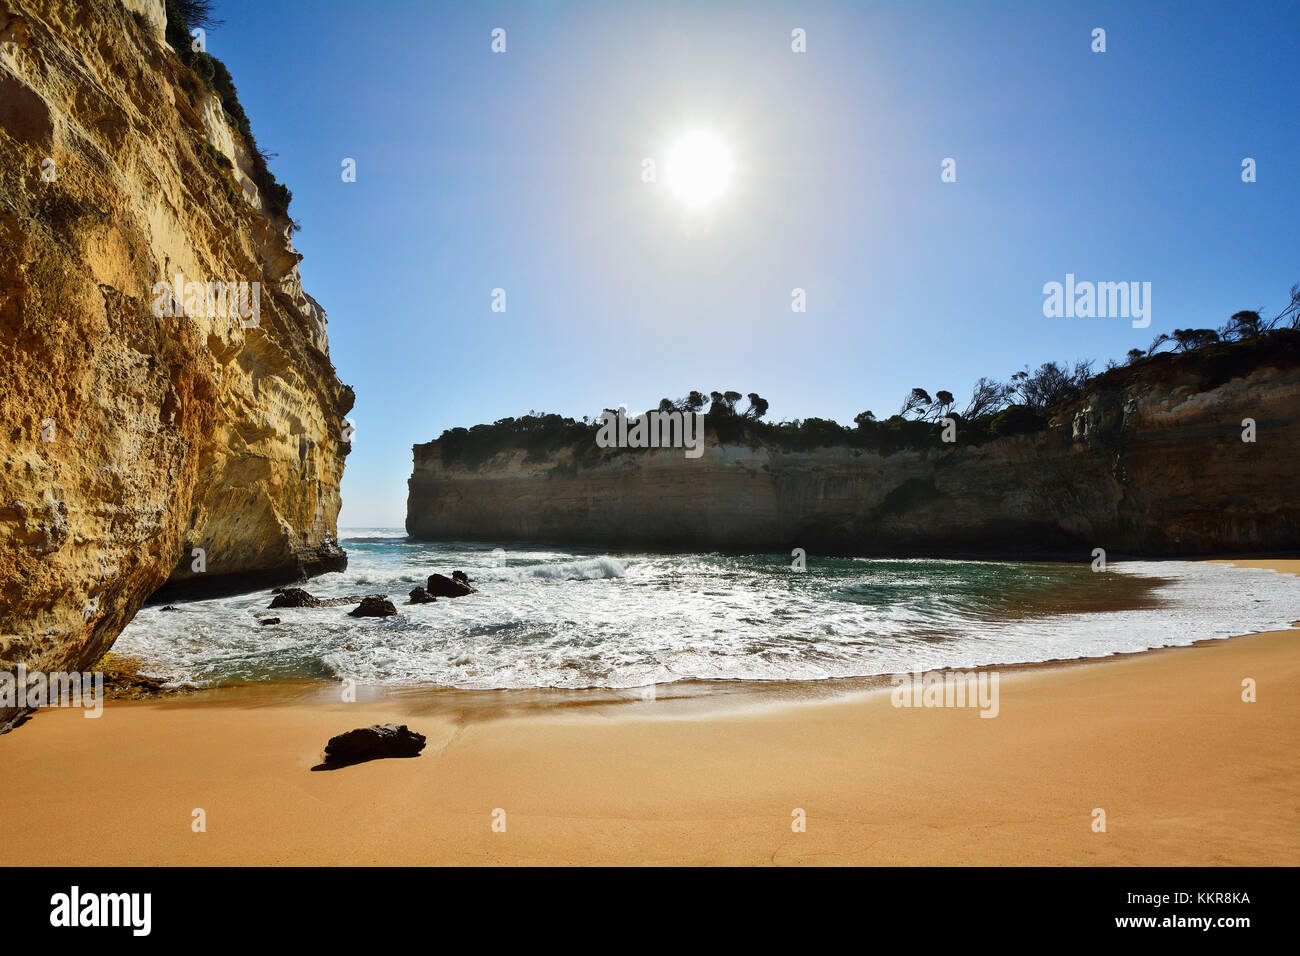 Sea Bay with Sandy Beach and Sun, Loch Ard Gorge, Port Campbell, Great Ocean Road, Victoria, Australia Stock Photo